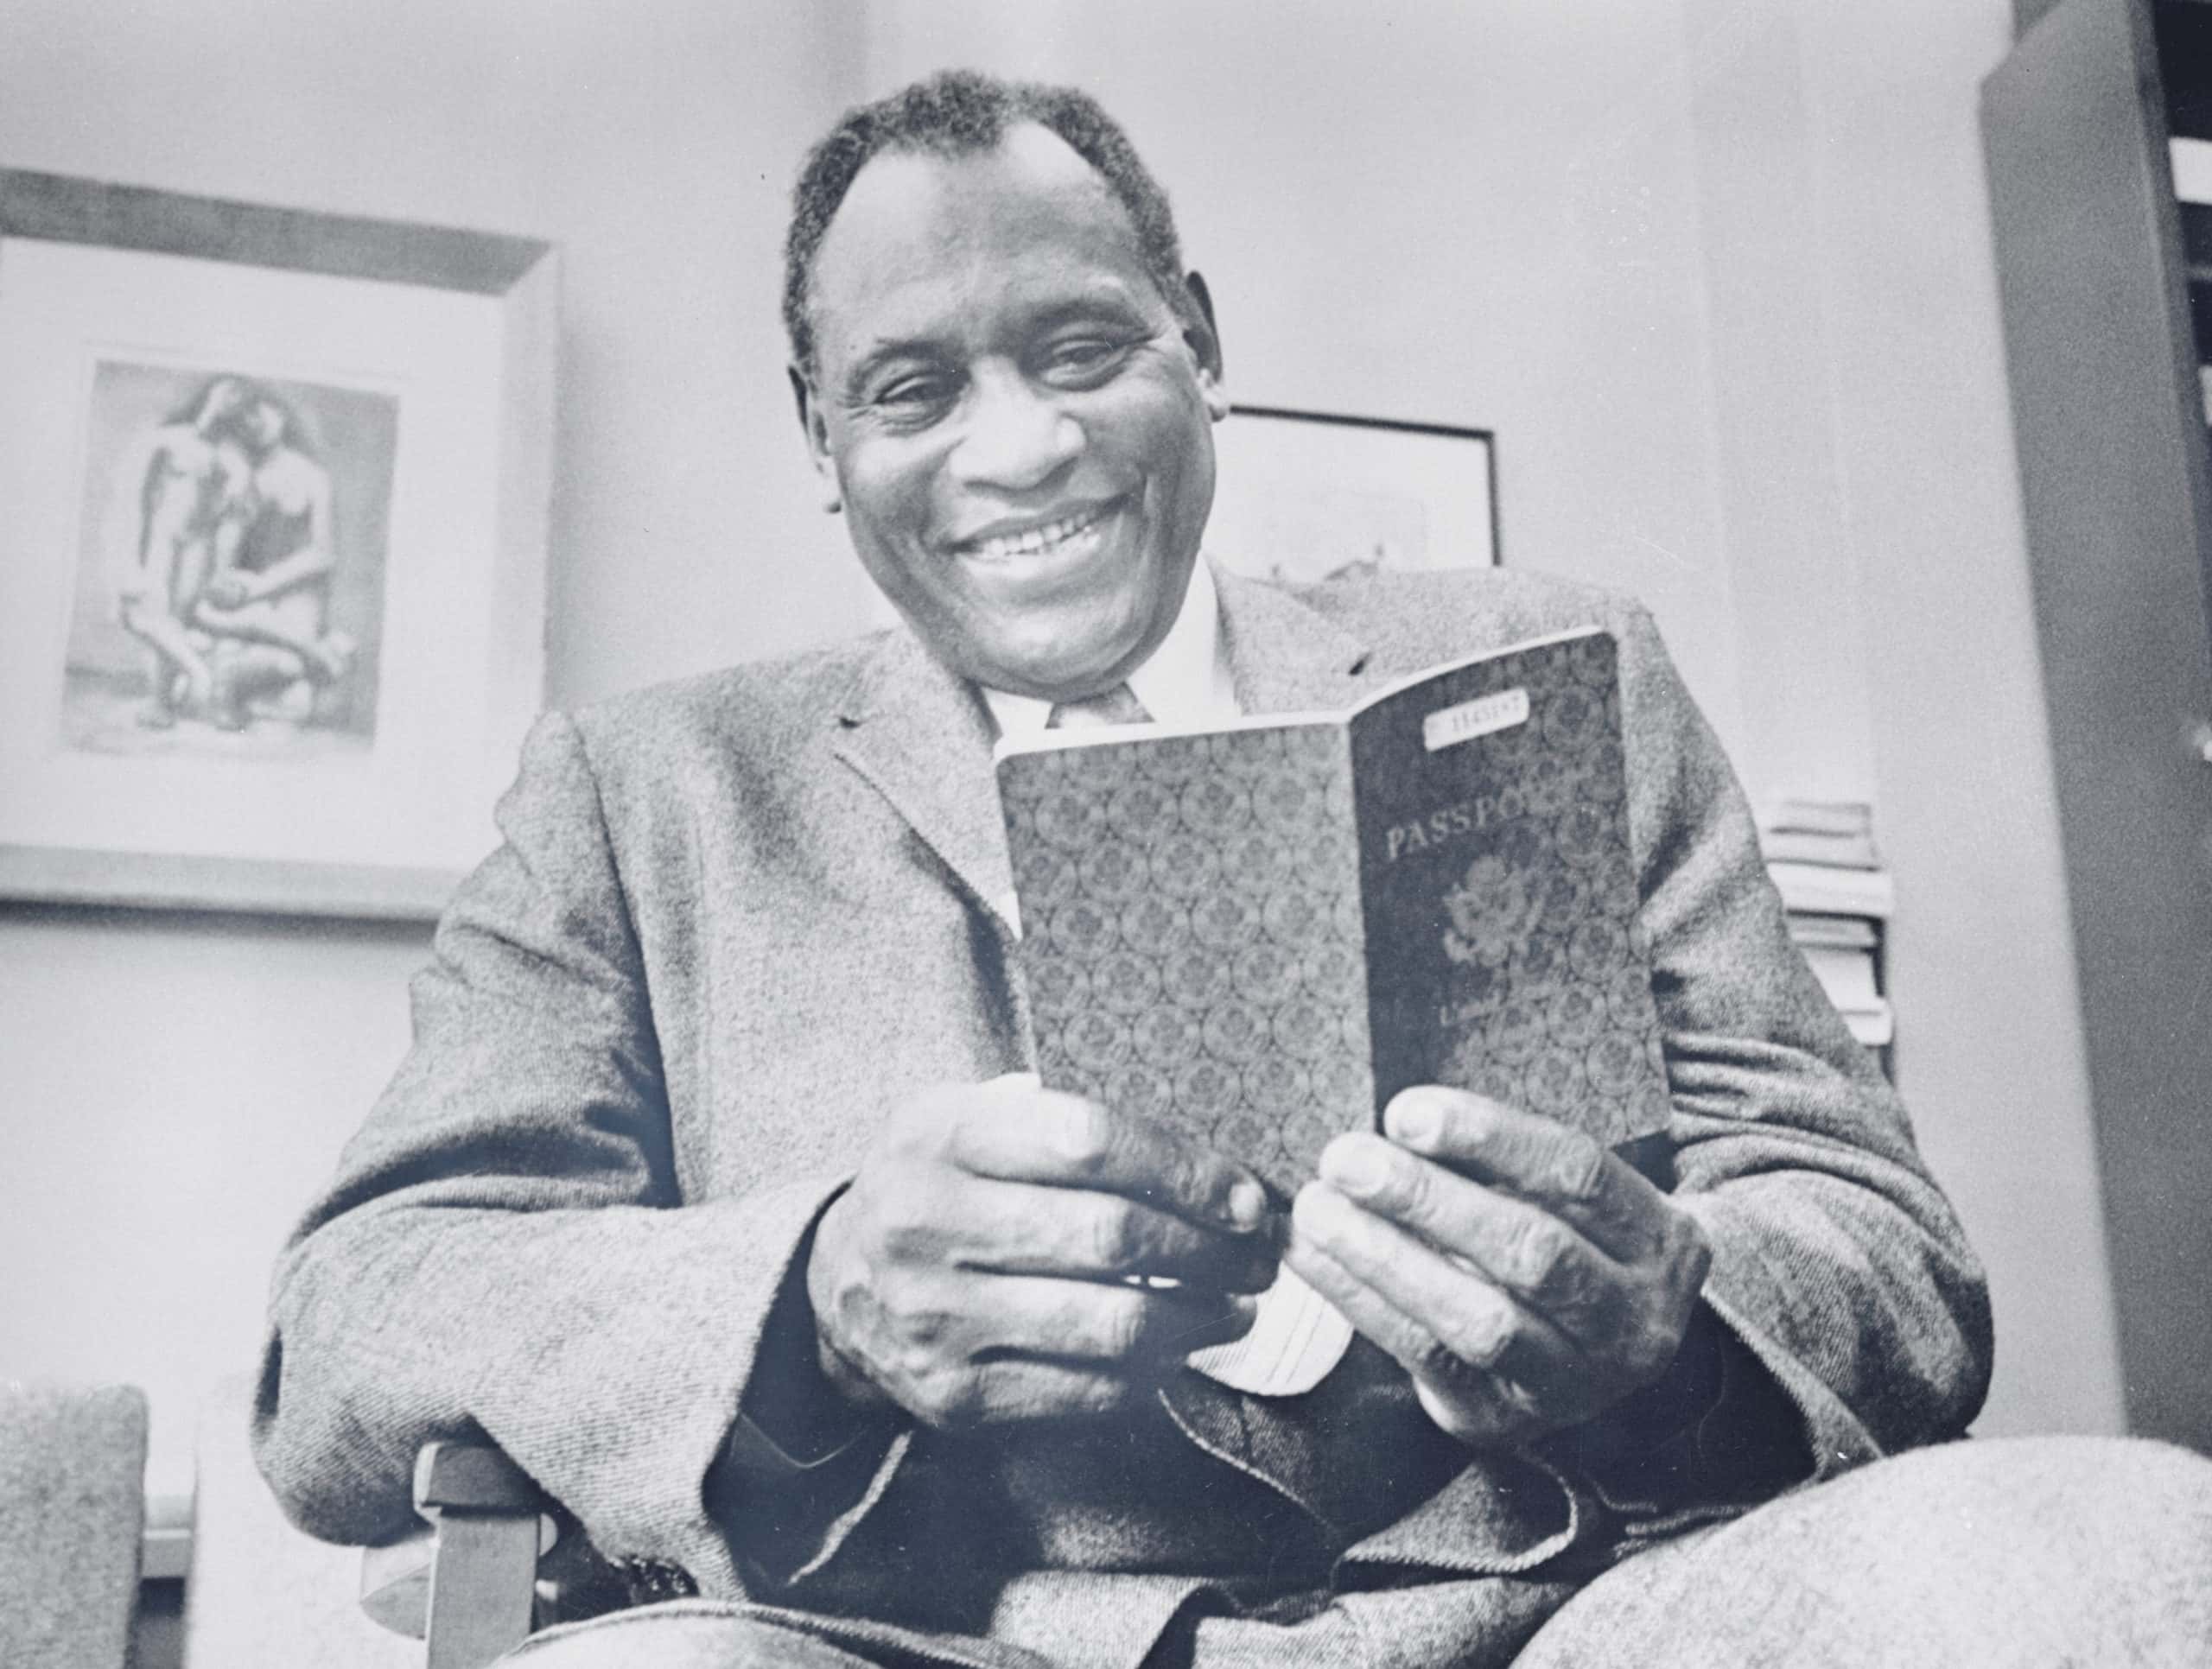 Paul Robeson facts